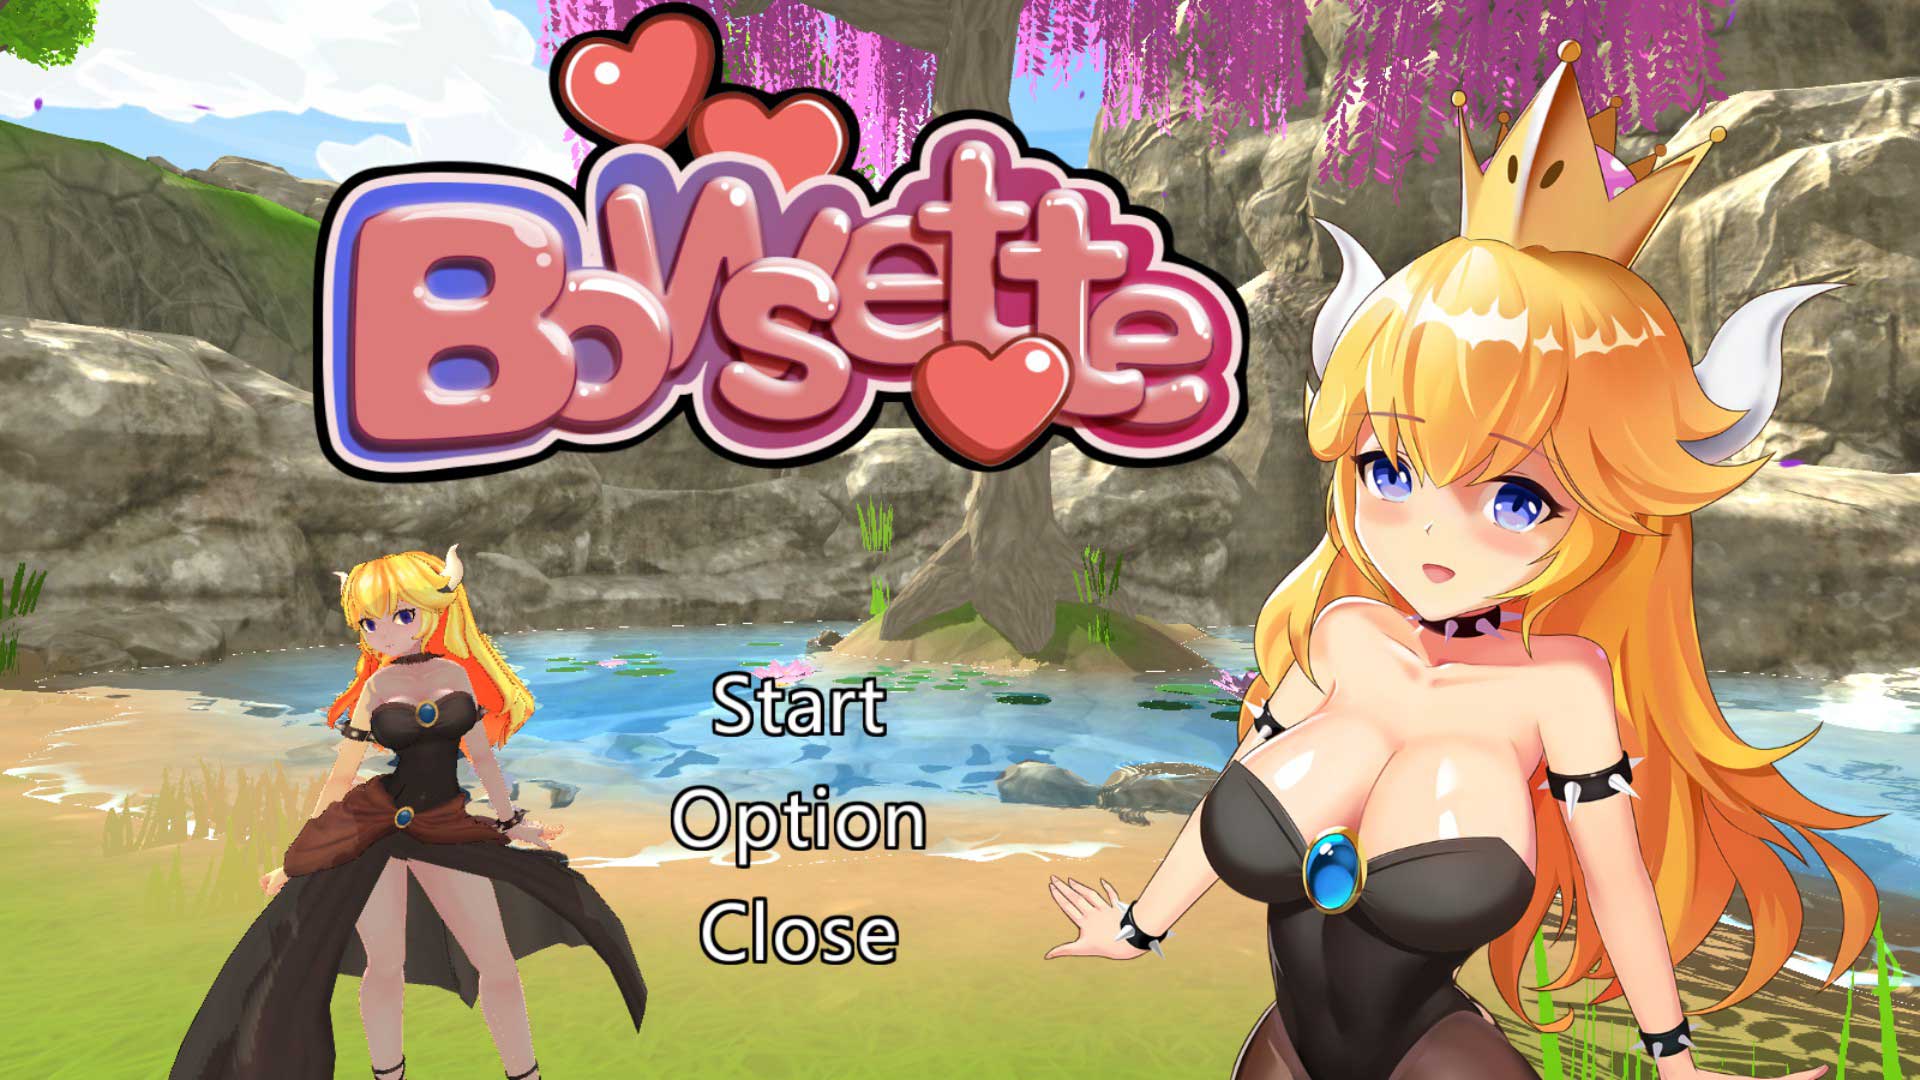 Bowsette hentai game